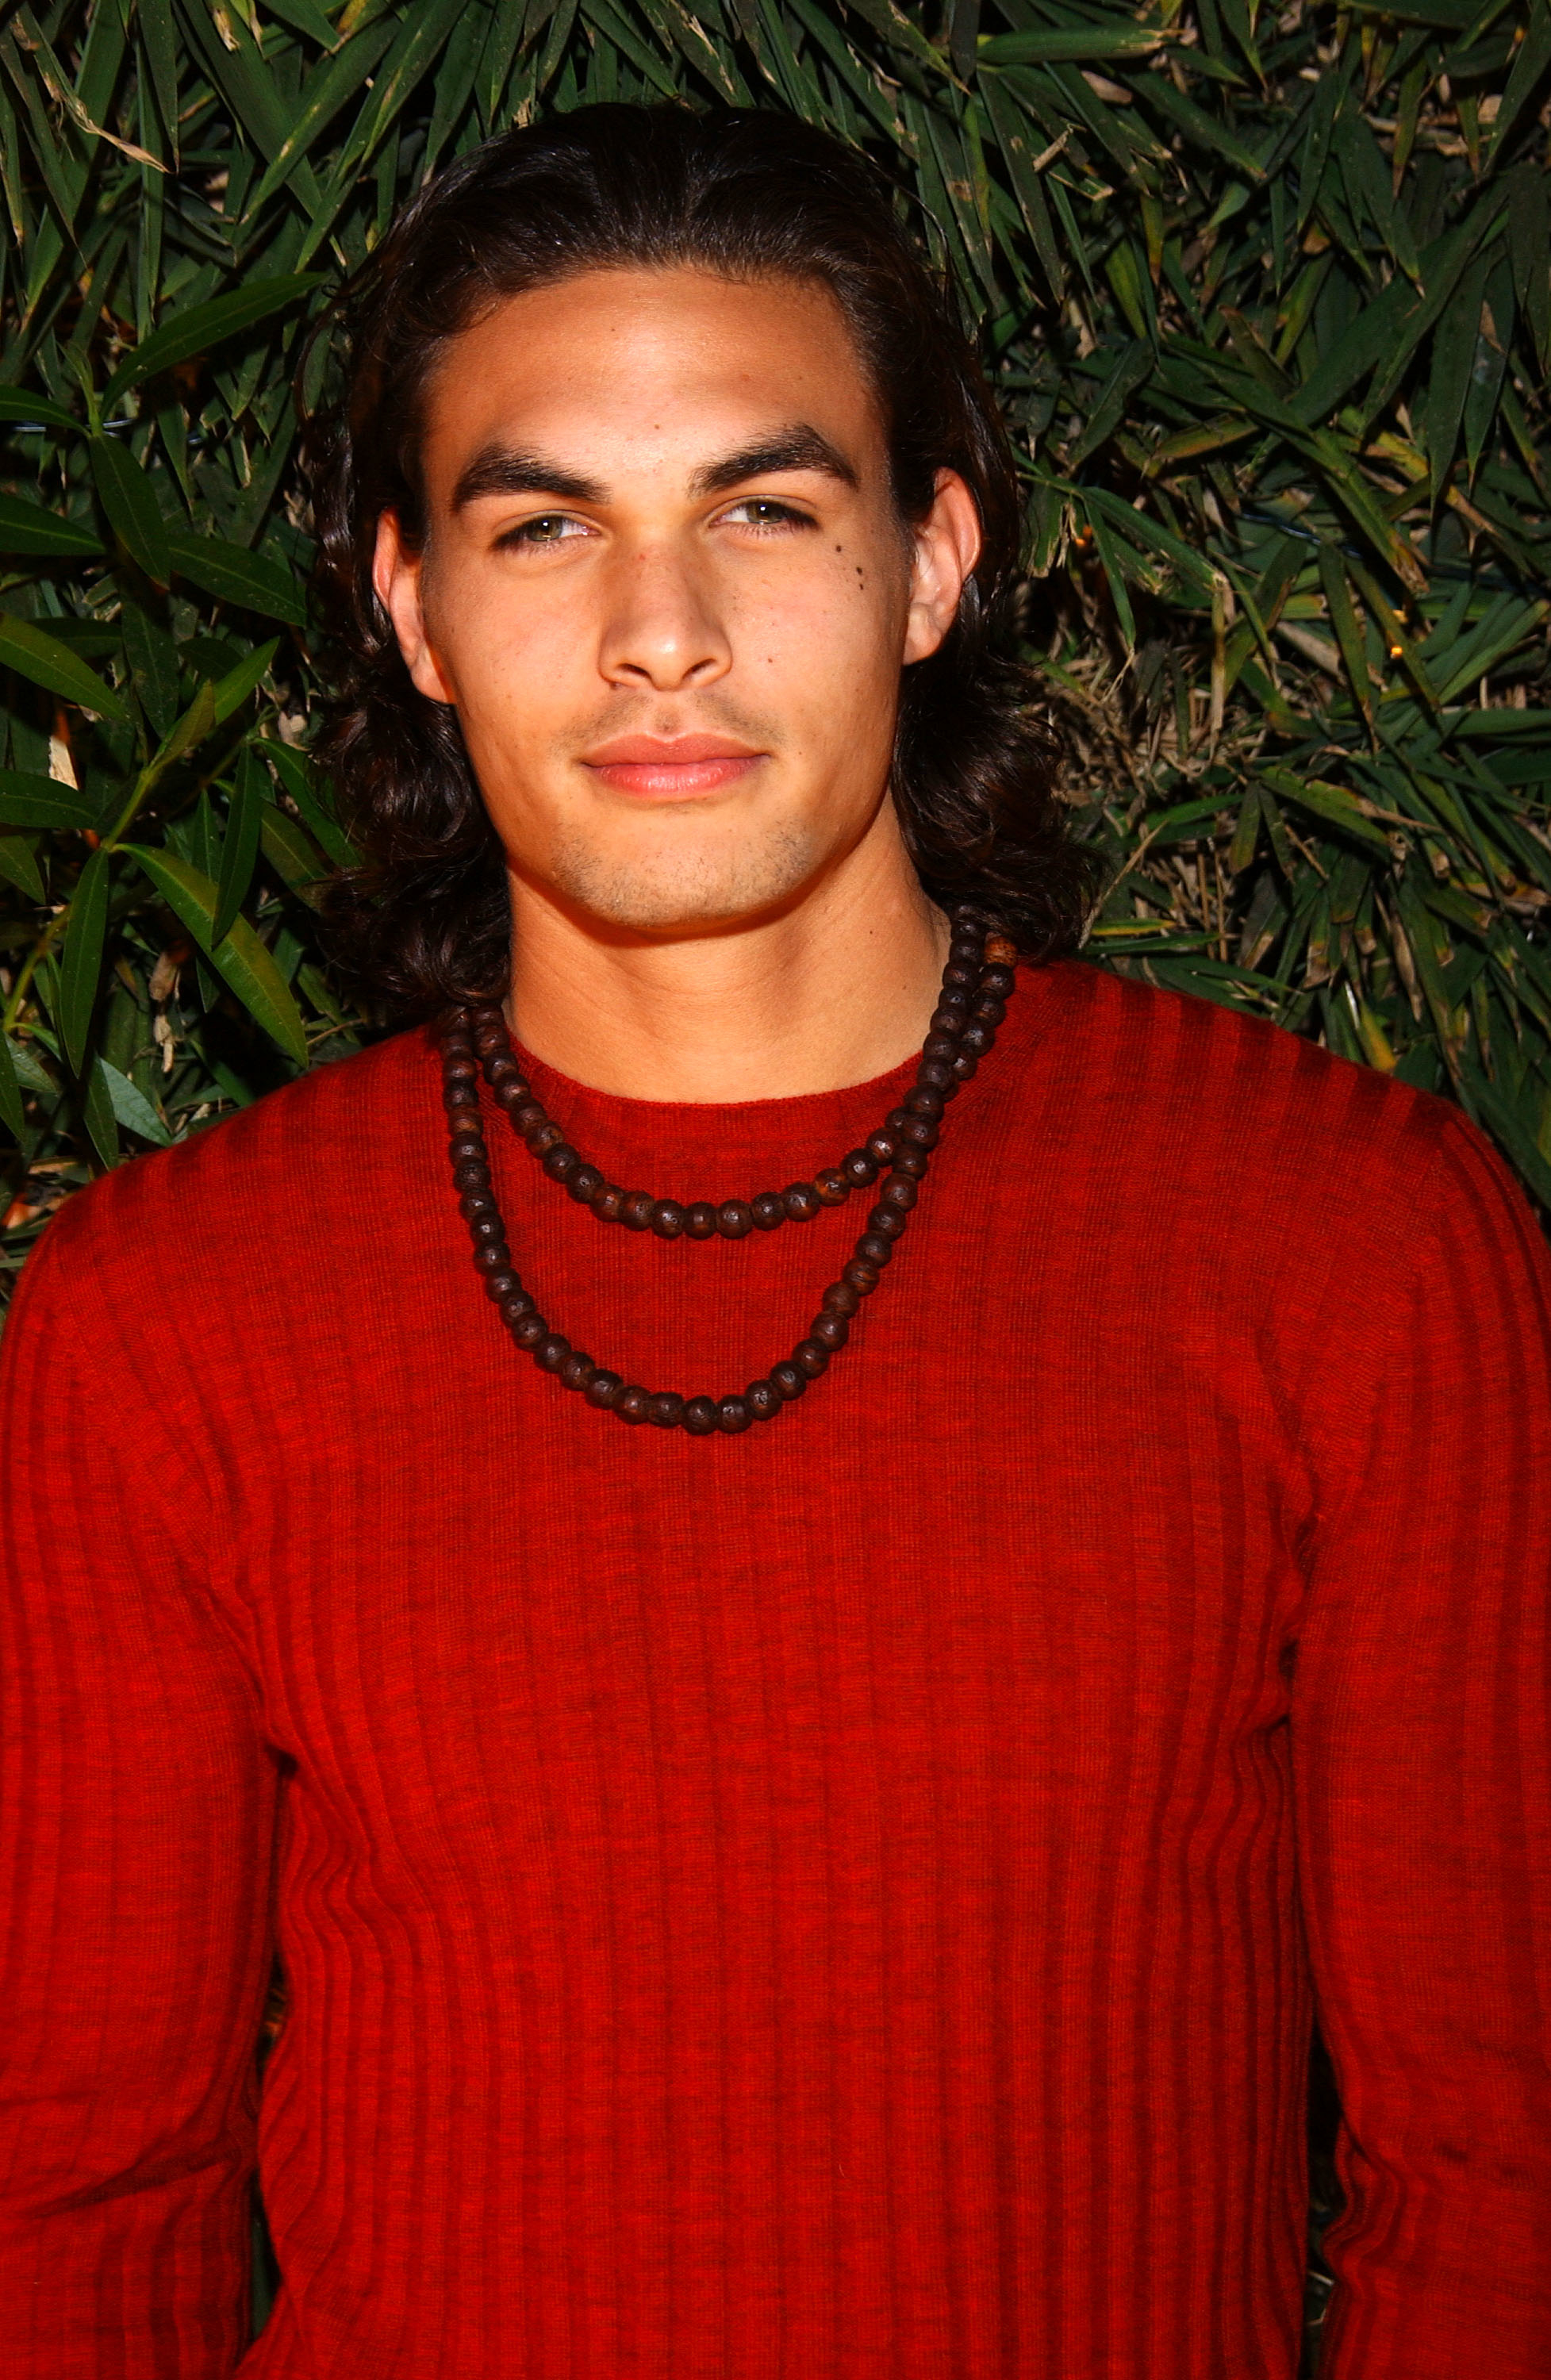 In a red sweater and two-strand necklace